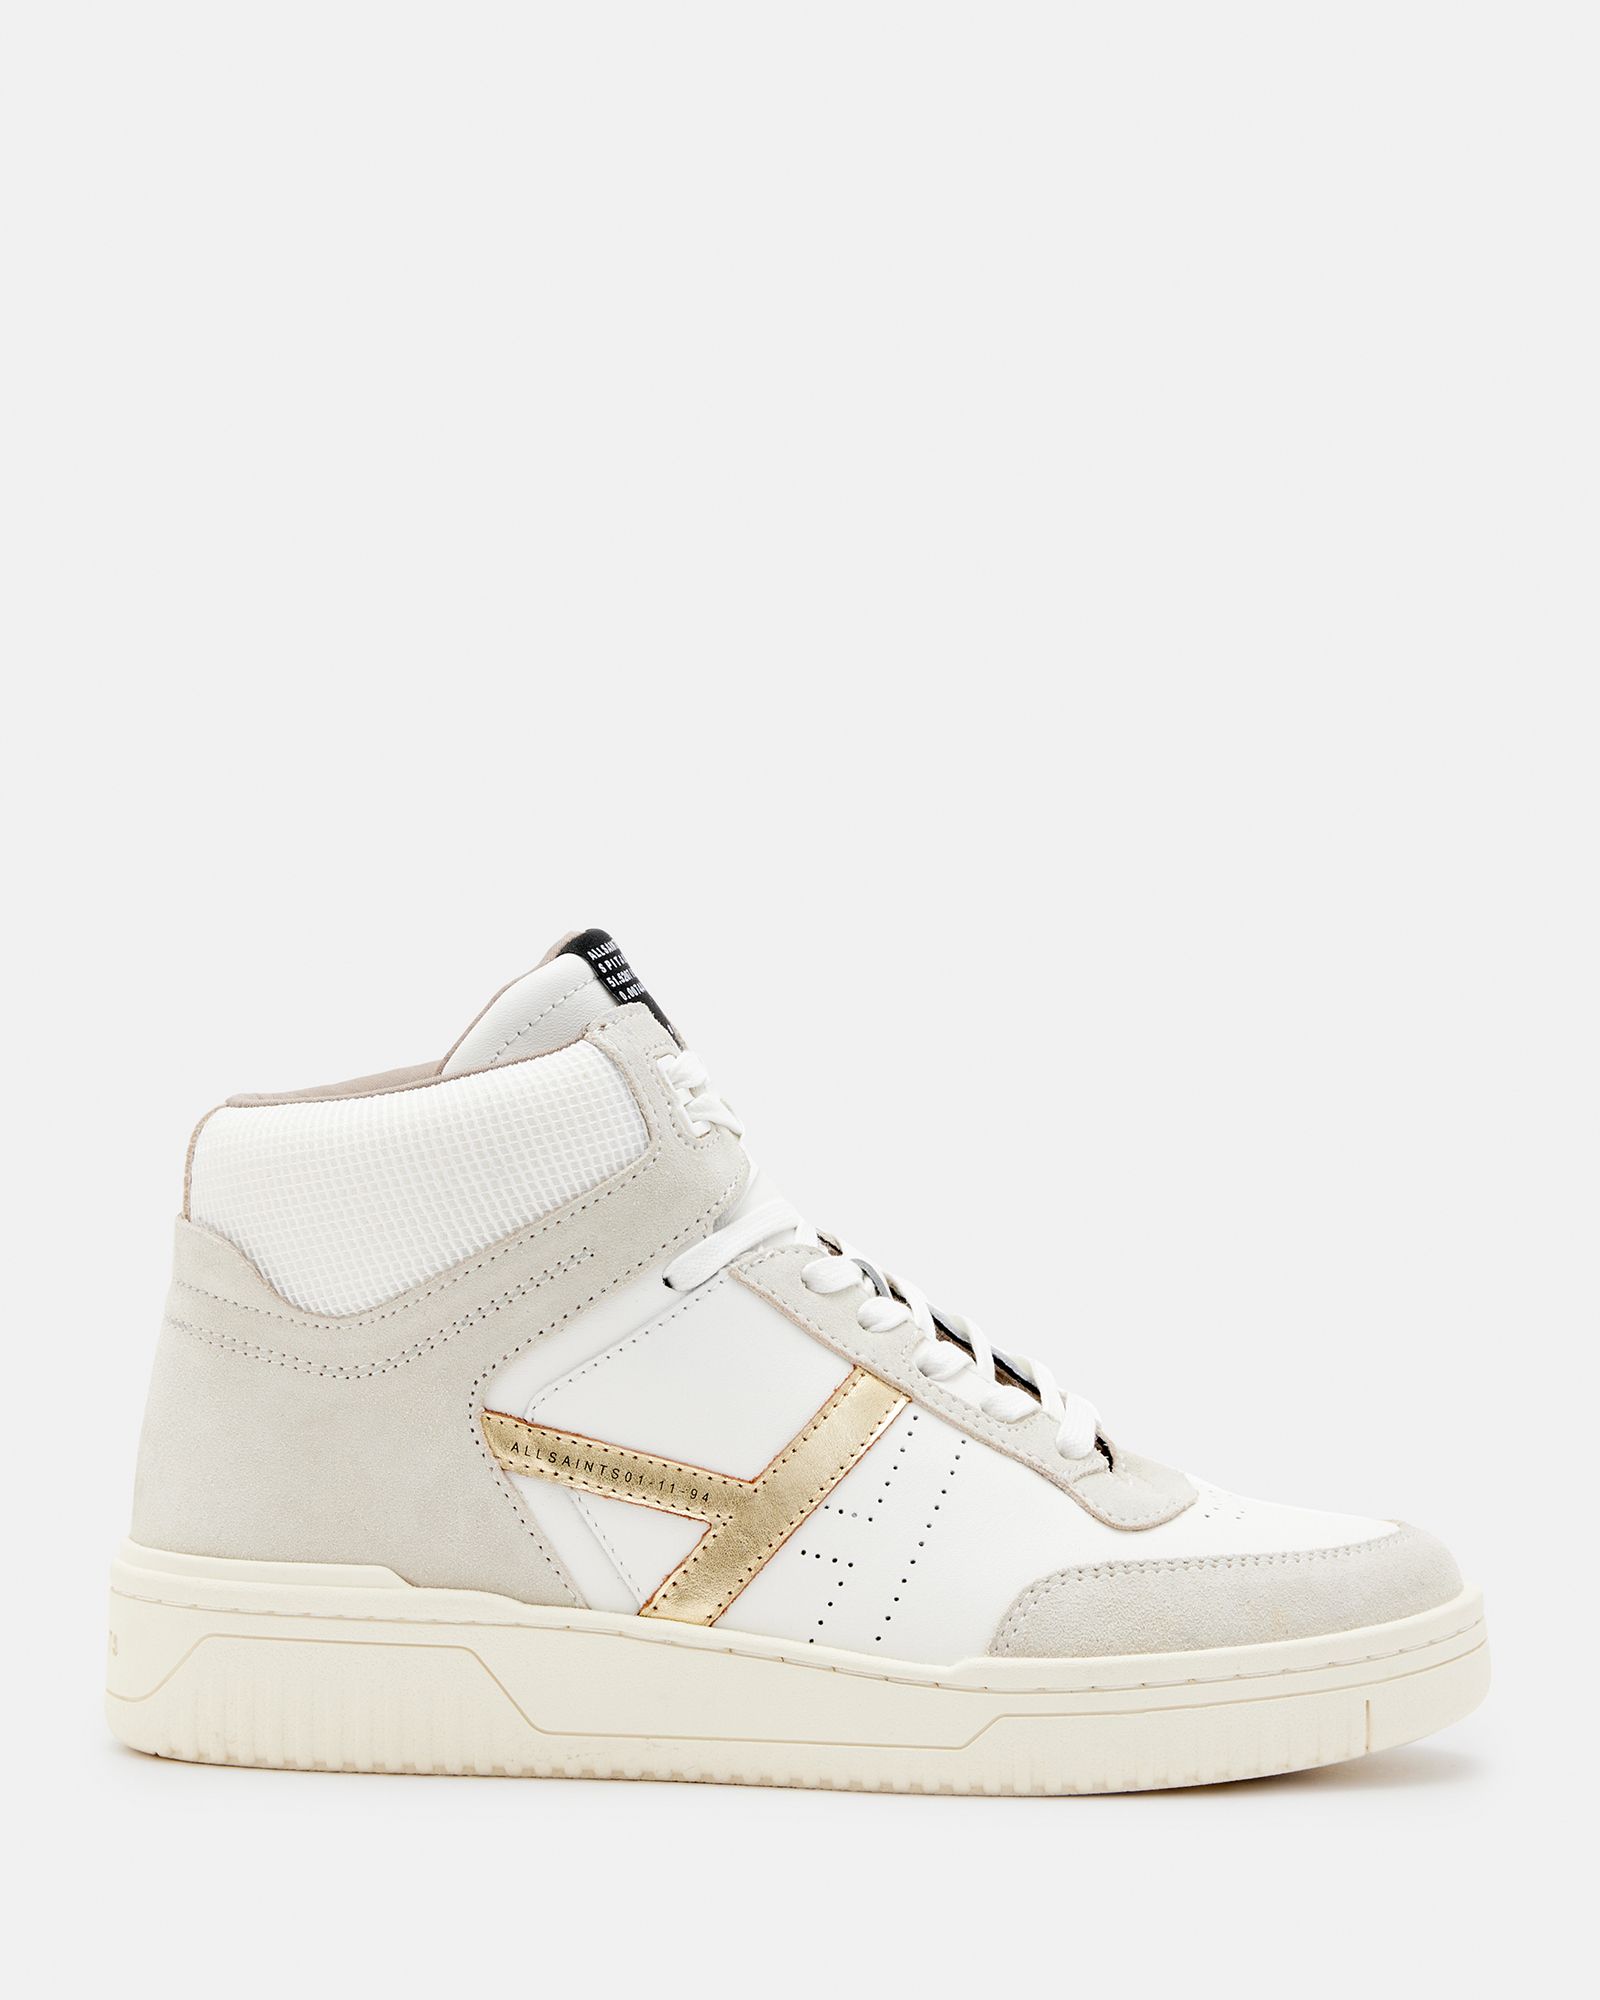 Pro Suede High Top Sneakers | AllSaints US